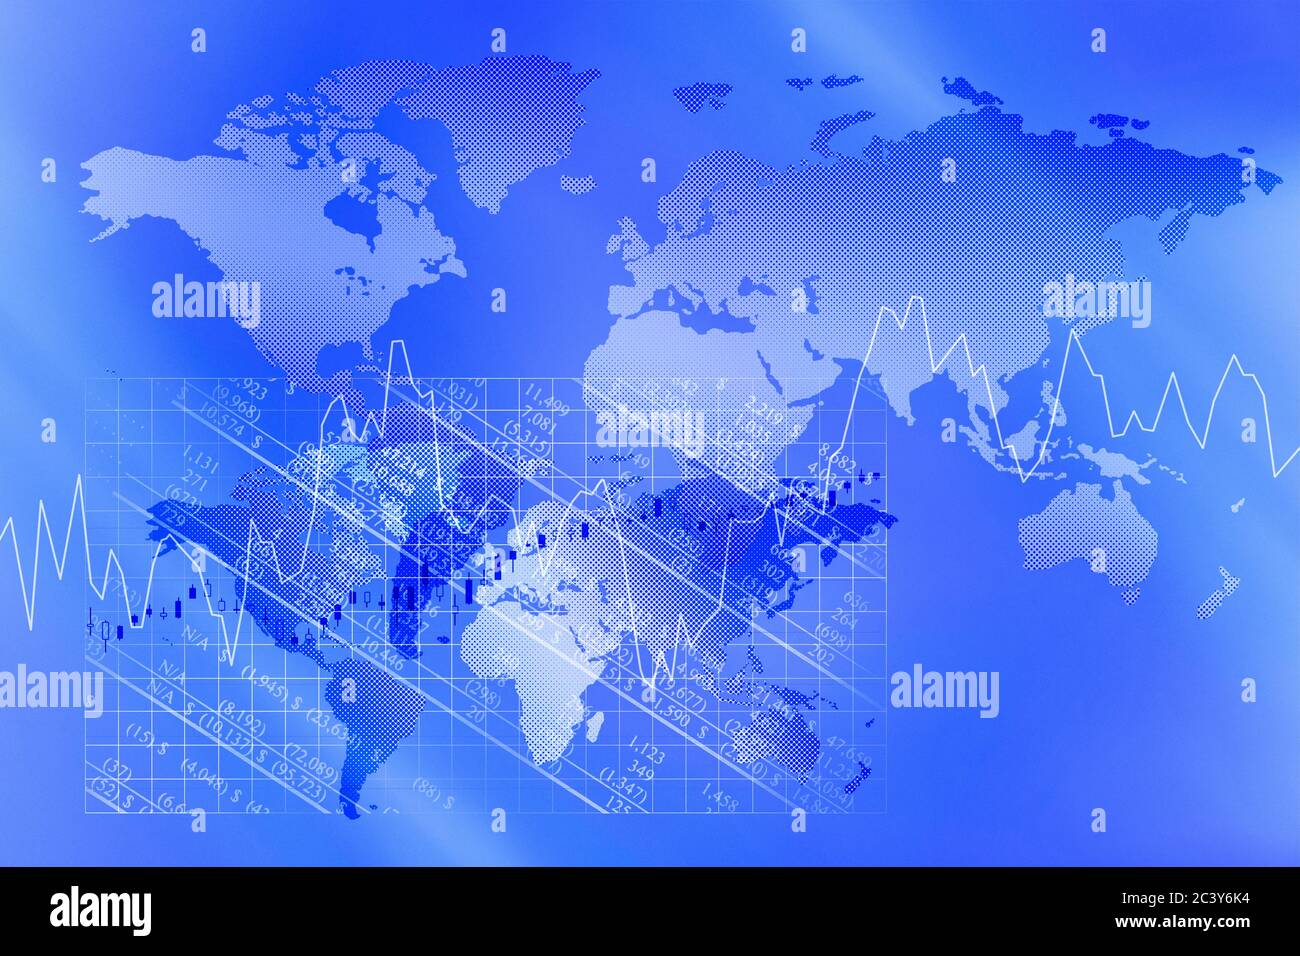 Blue world map with line graph Stock Photo